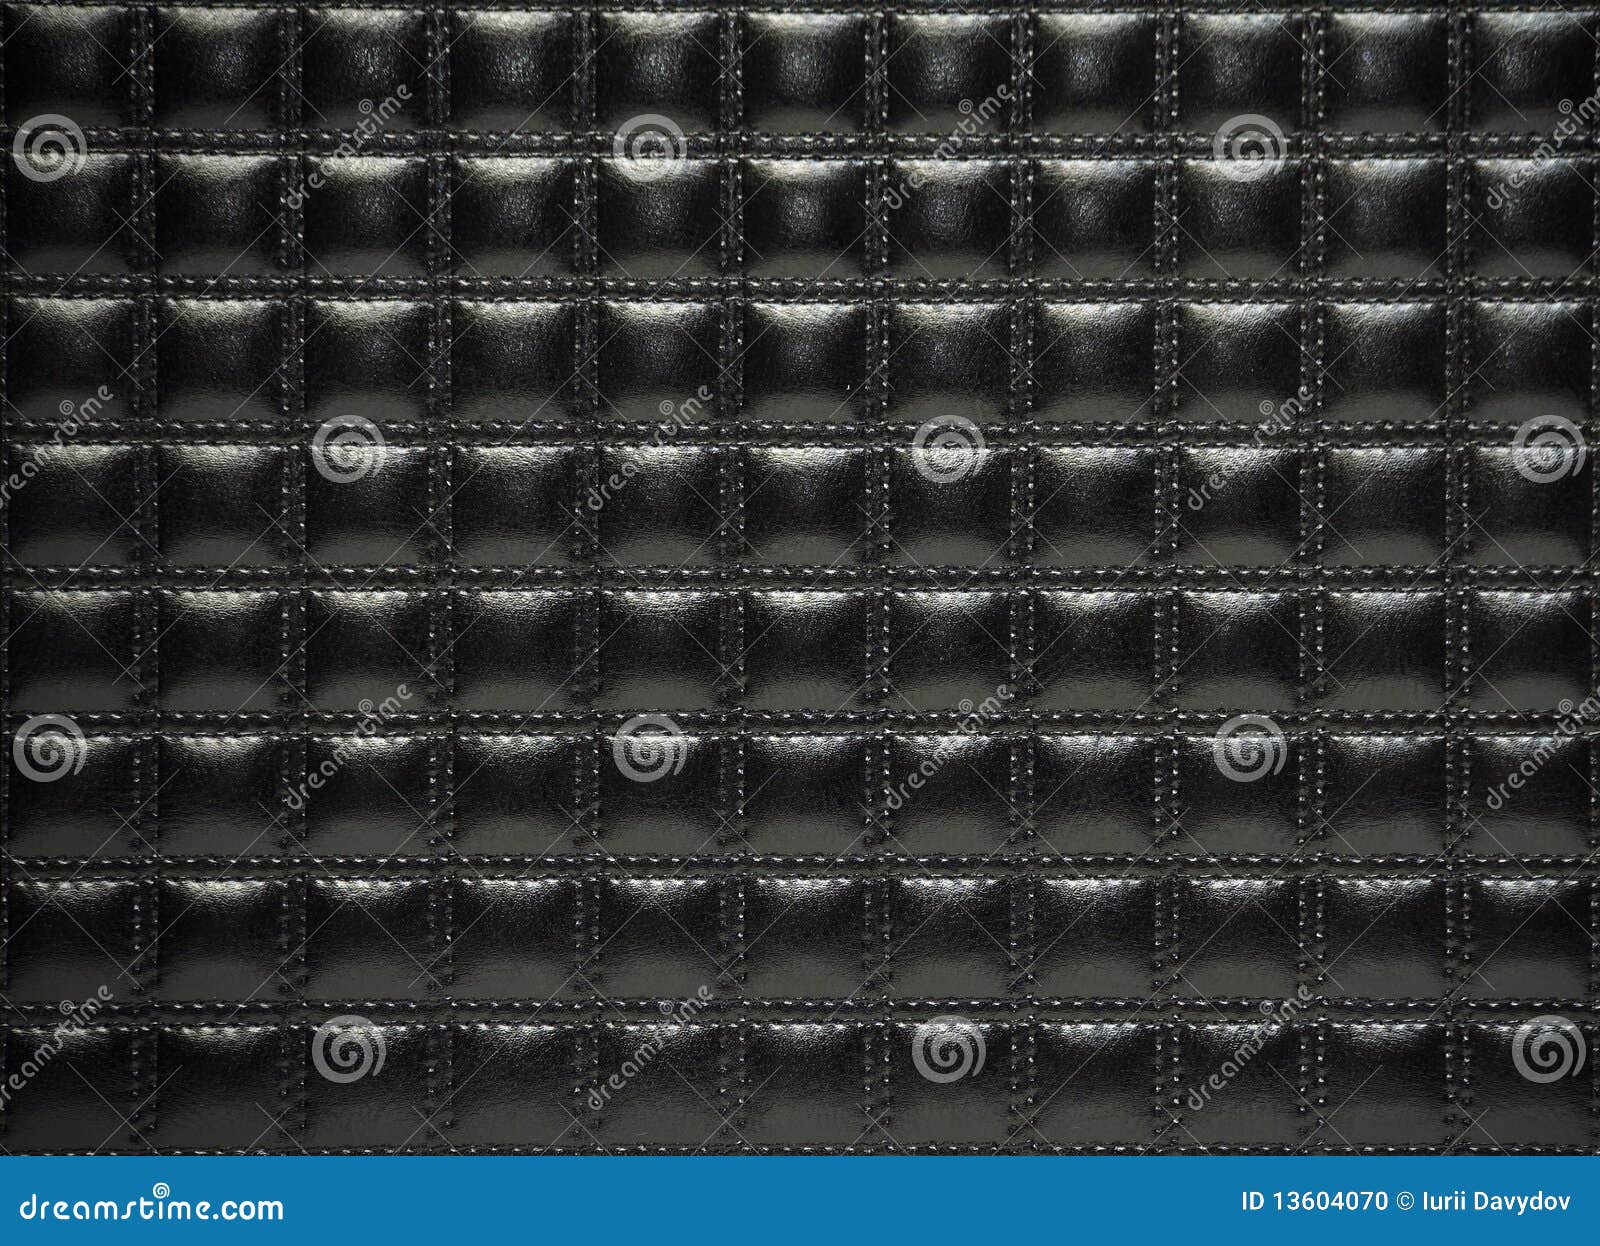 Black Leather Upholstery of Furniture Stock Photo - Image of backdrop ...